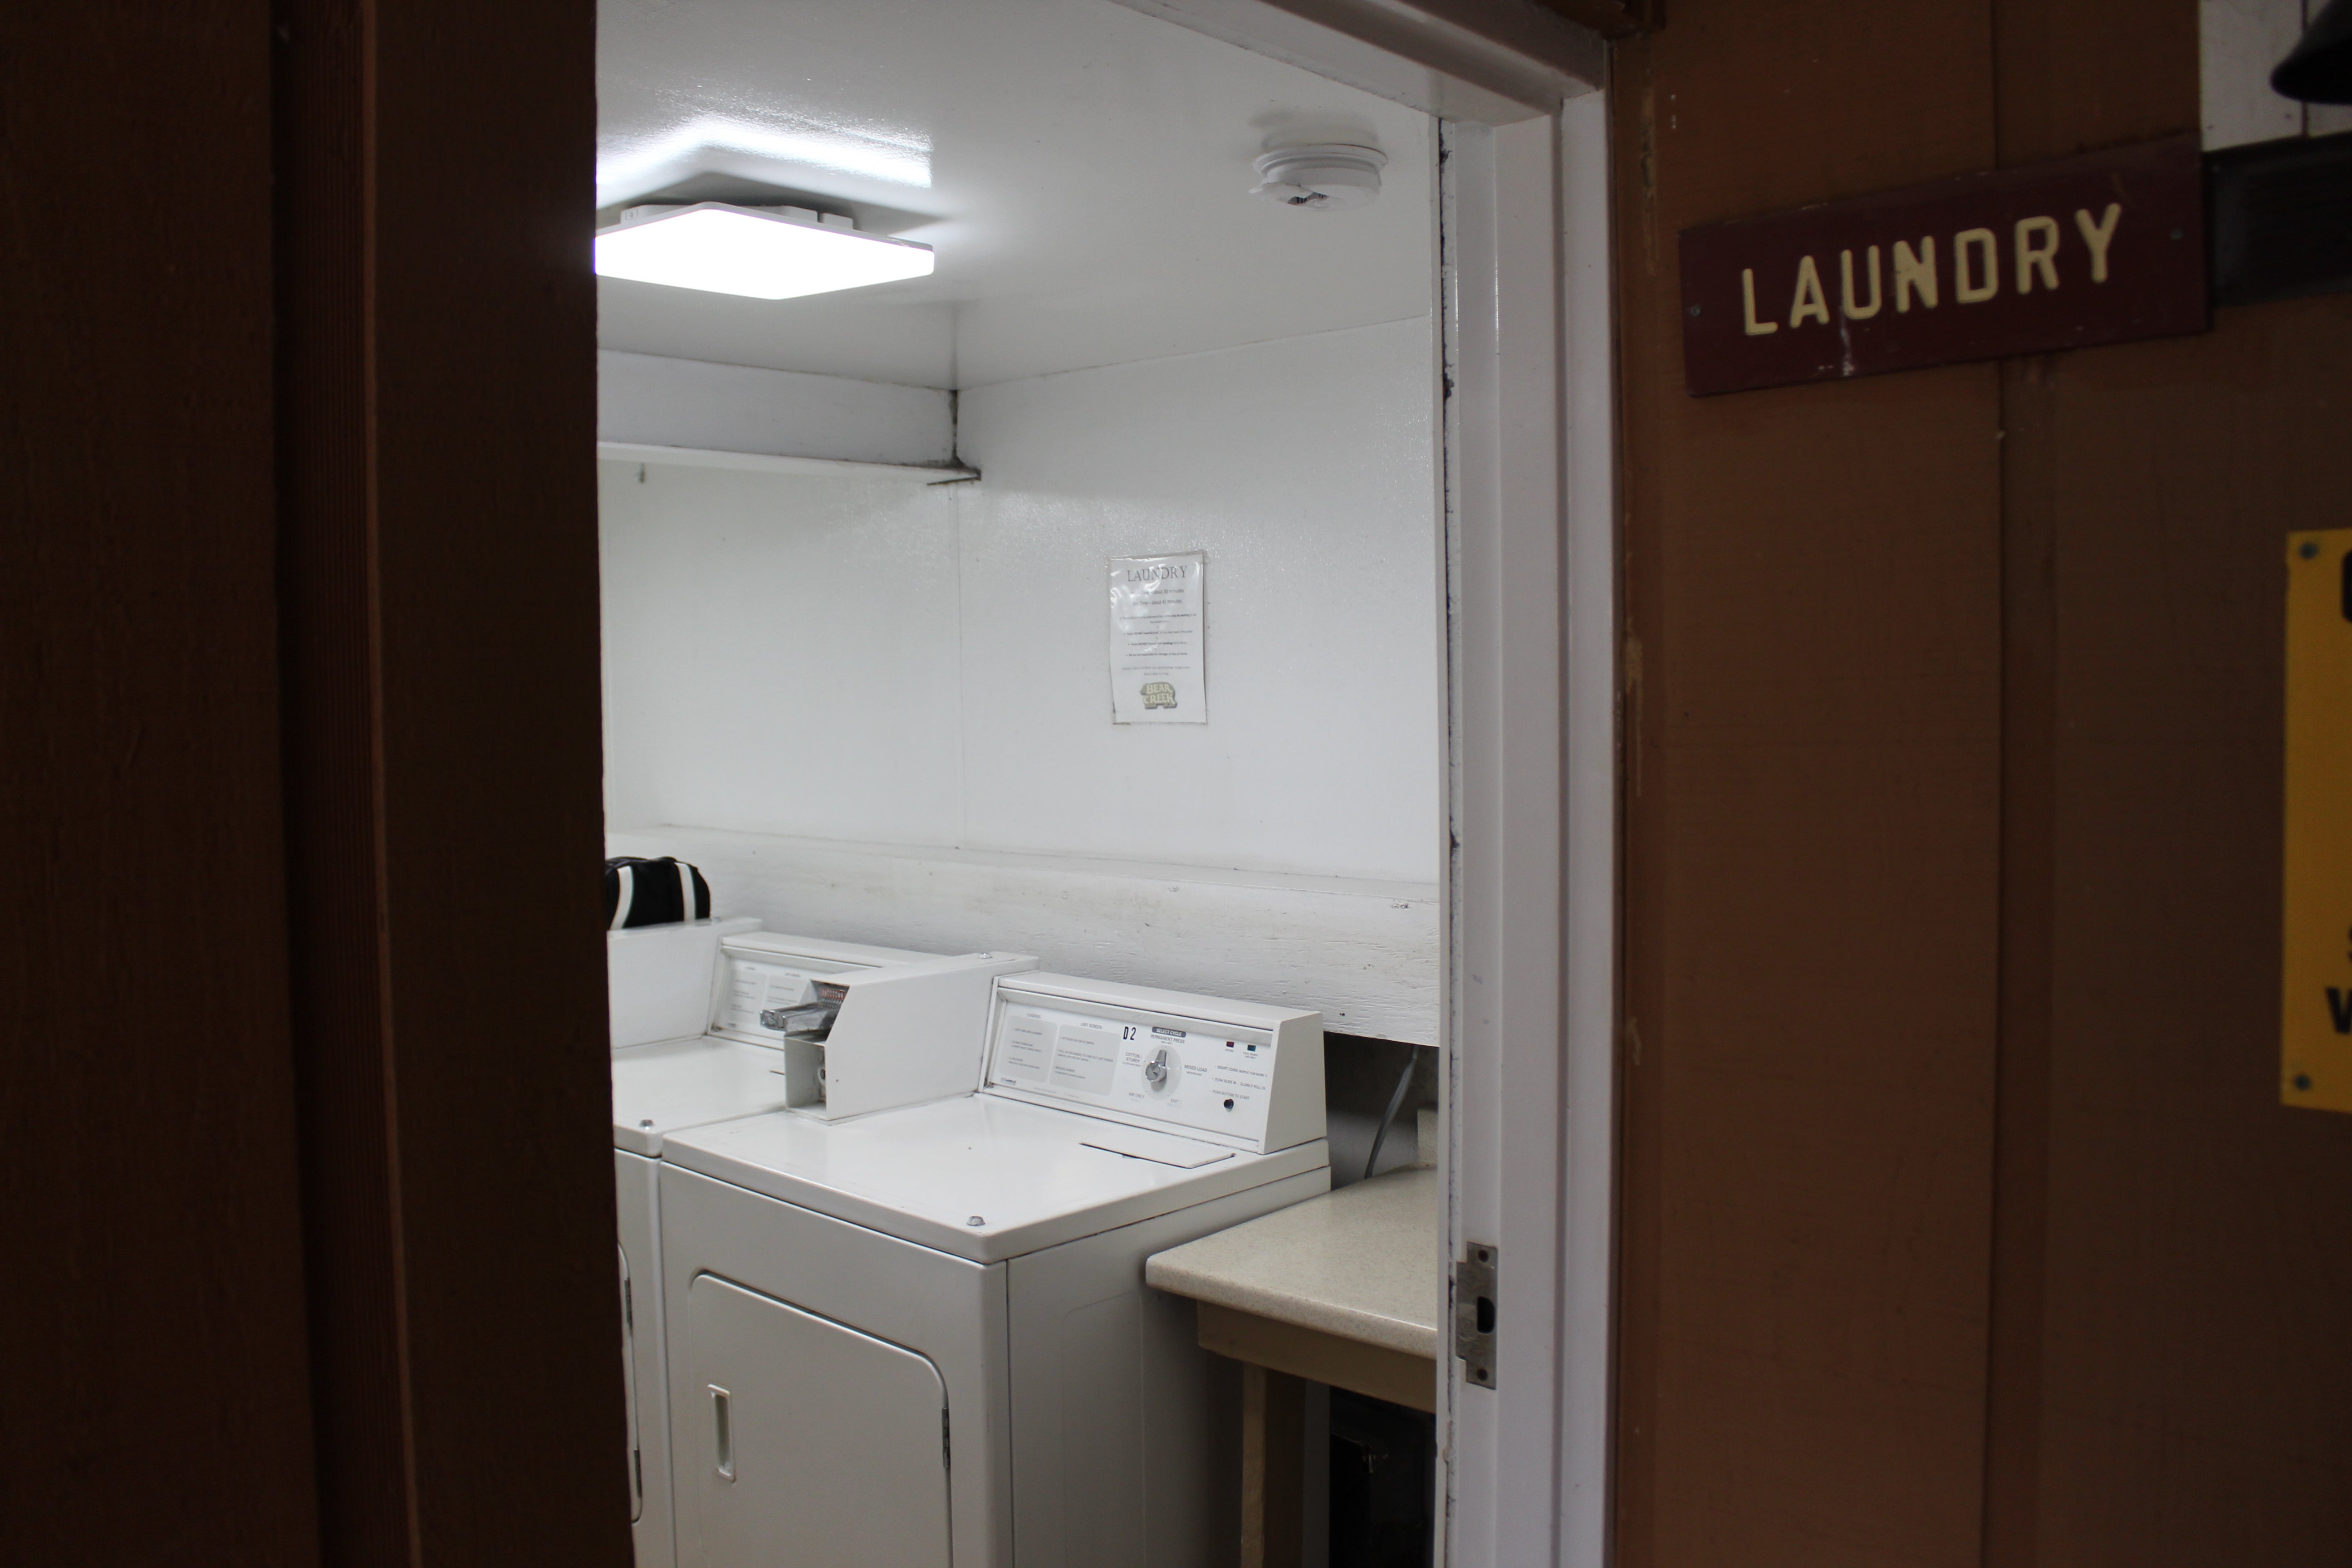 Nice laundry room with $1.75 for the wash cycle